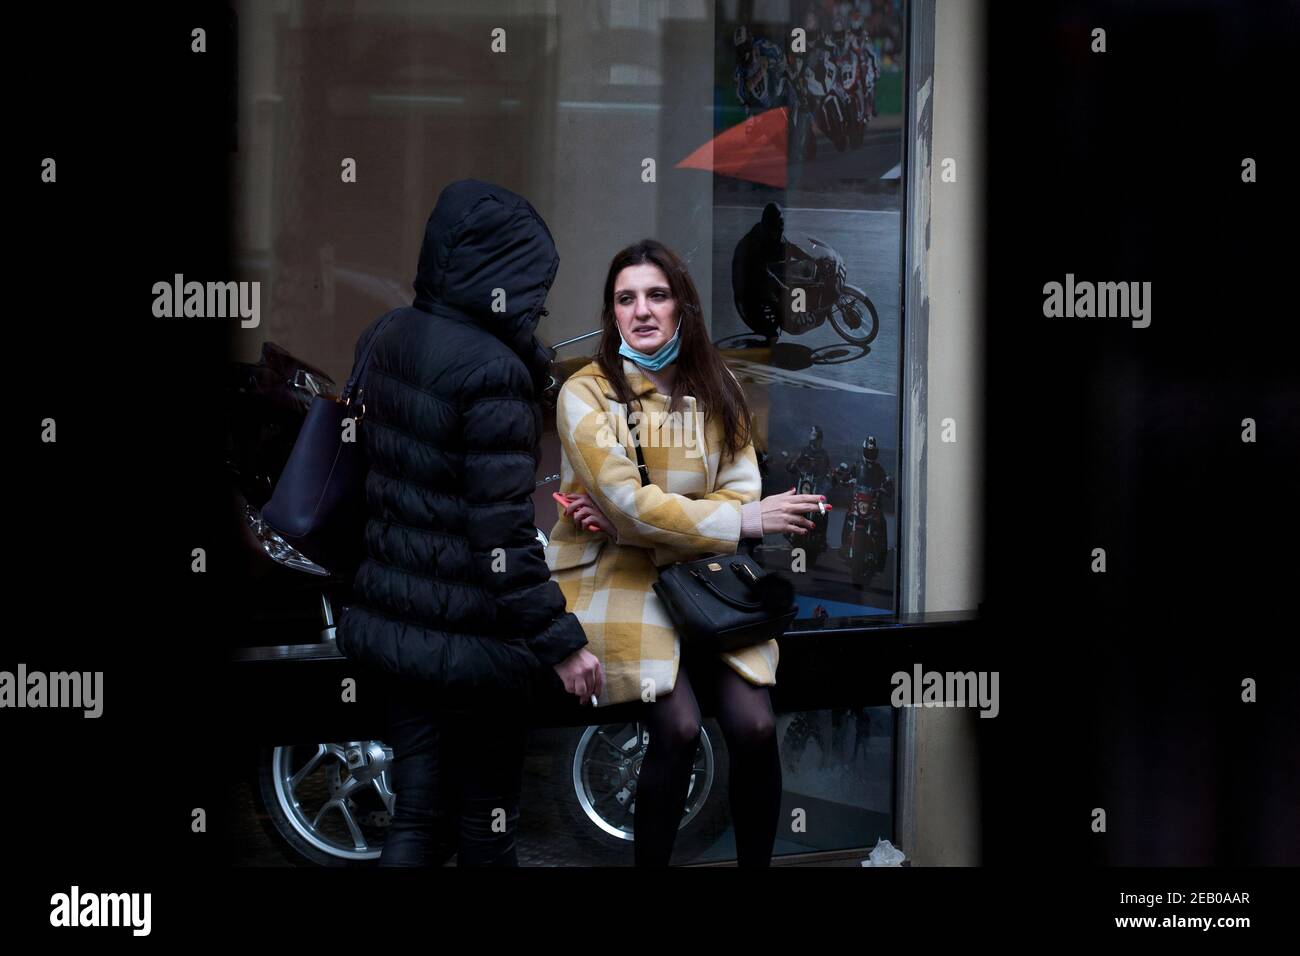 Two women smoking a cigarette in the street, Barcelona, Spain. Stock Photo